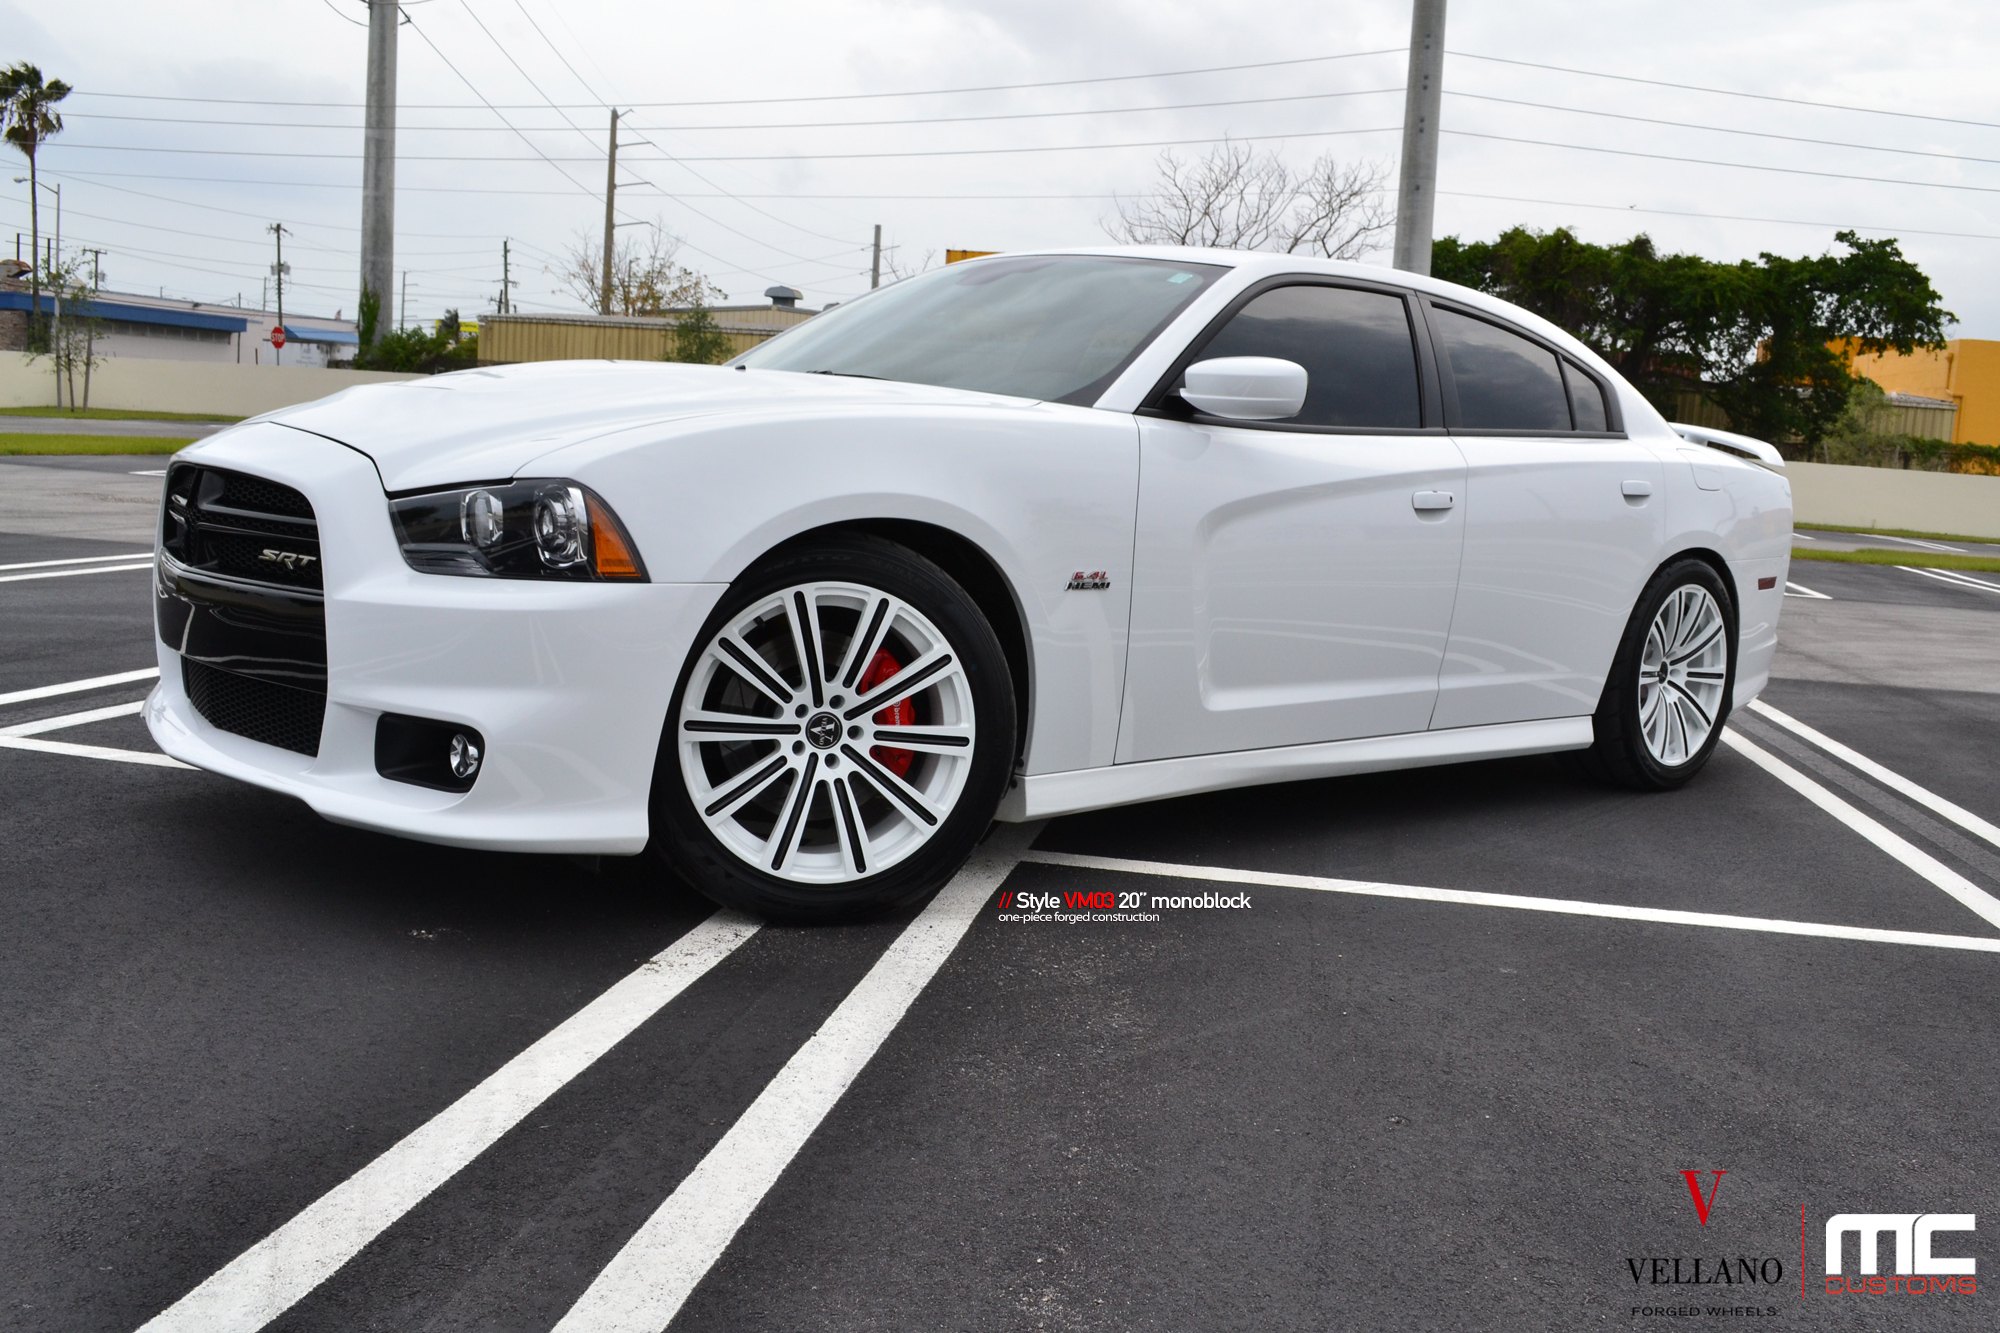 20 Inch Vellano Rims on White Dodge Charger - Photo by Vellano